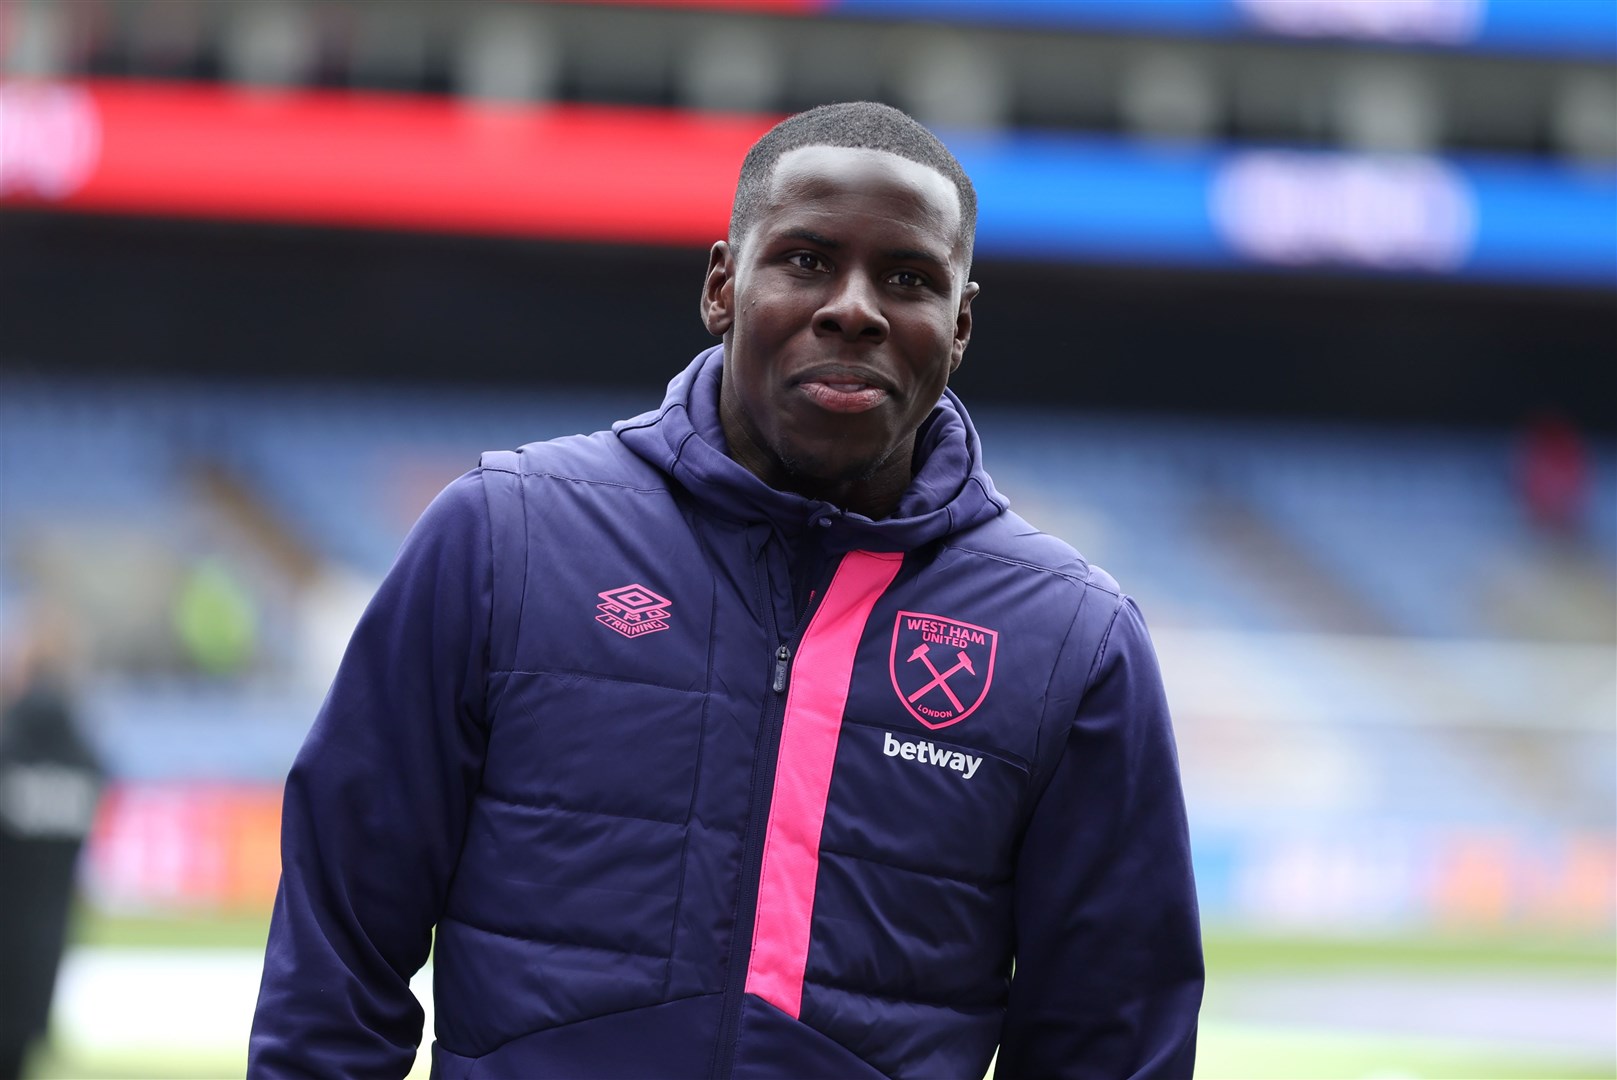 Saif Alrubie claimed he played a part in facilitating the transfer of Kurt Zouma in August 2021 from Chelsea to West Ham (Steven Paston/PA)